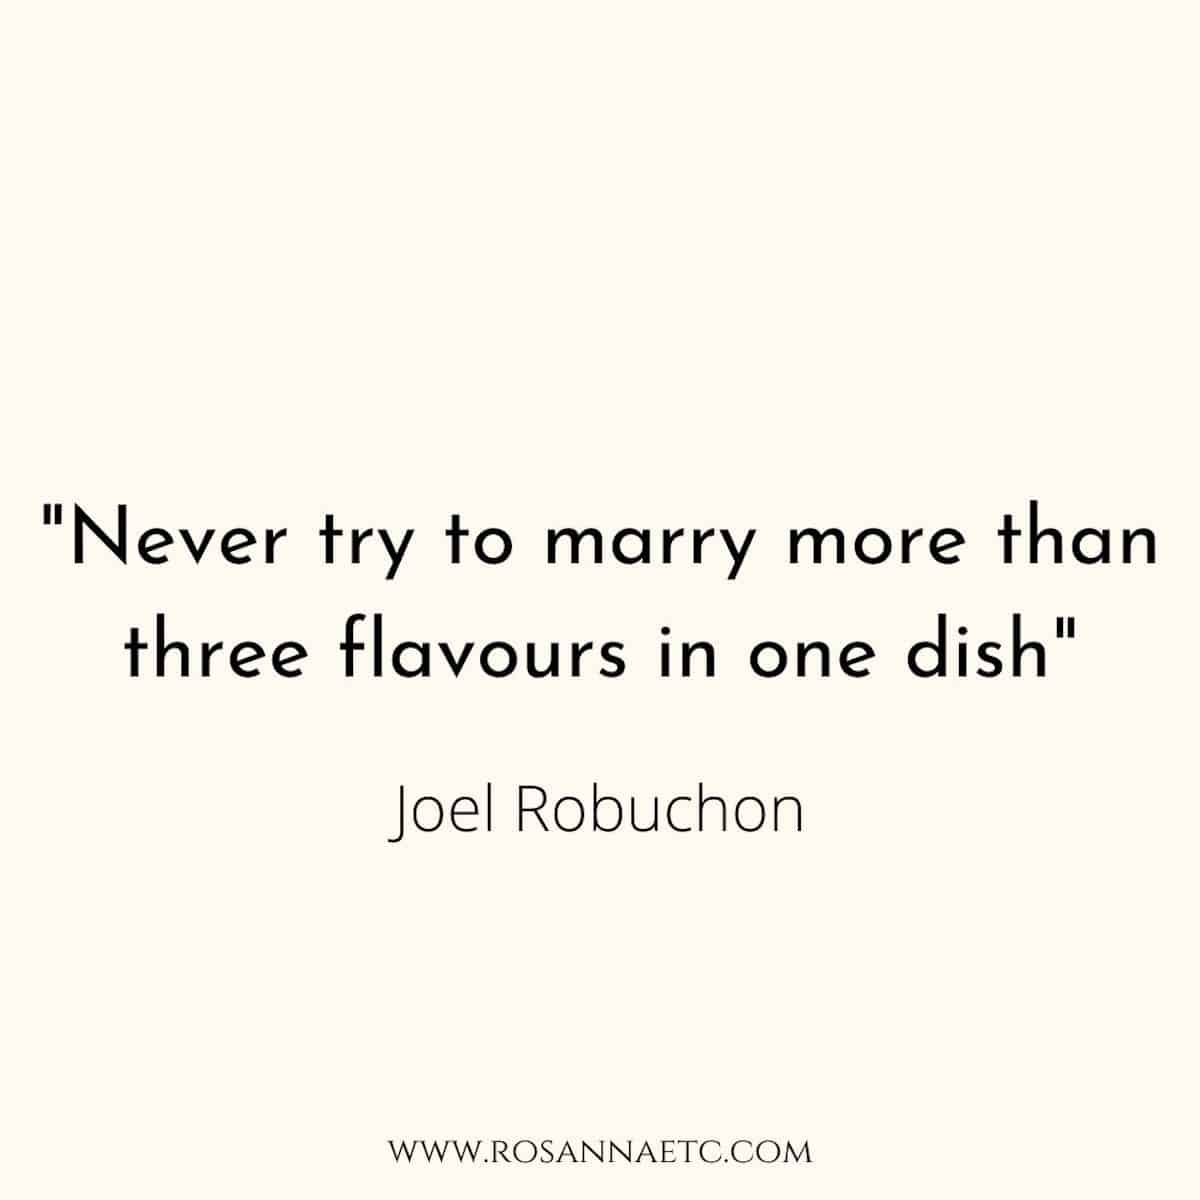 A quote from Joel Robuchon that reads "Never try to marry more than three flavours in one dish".